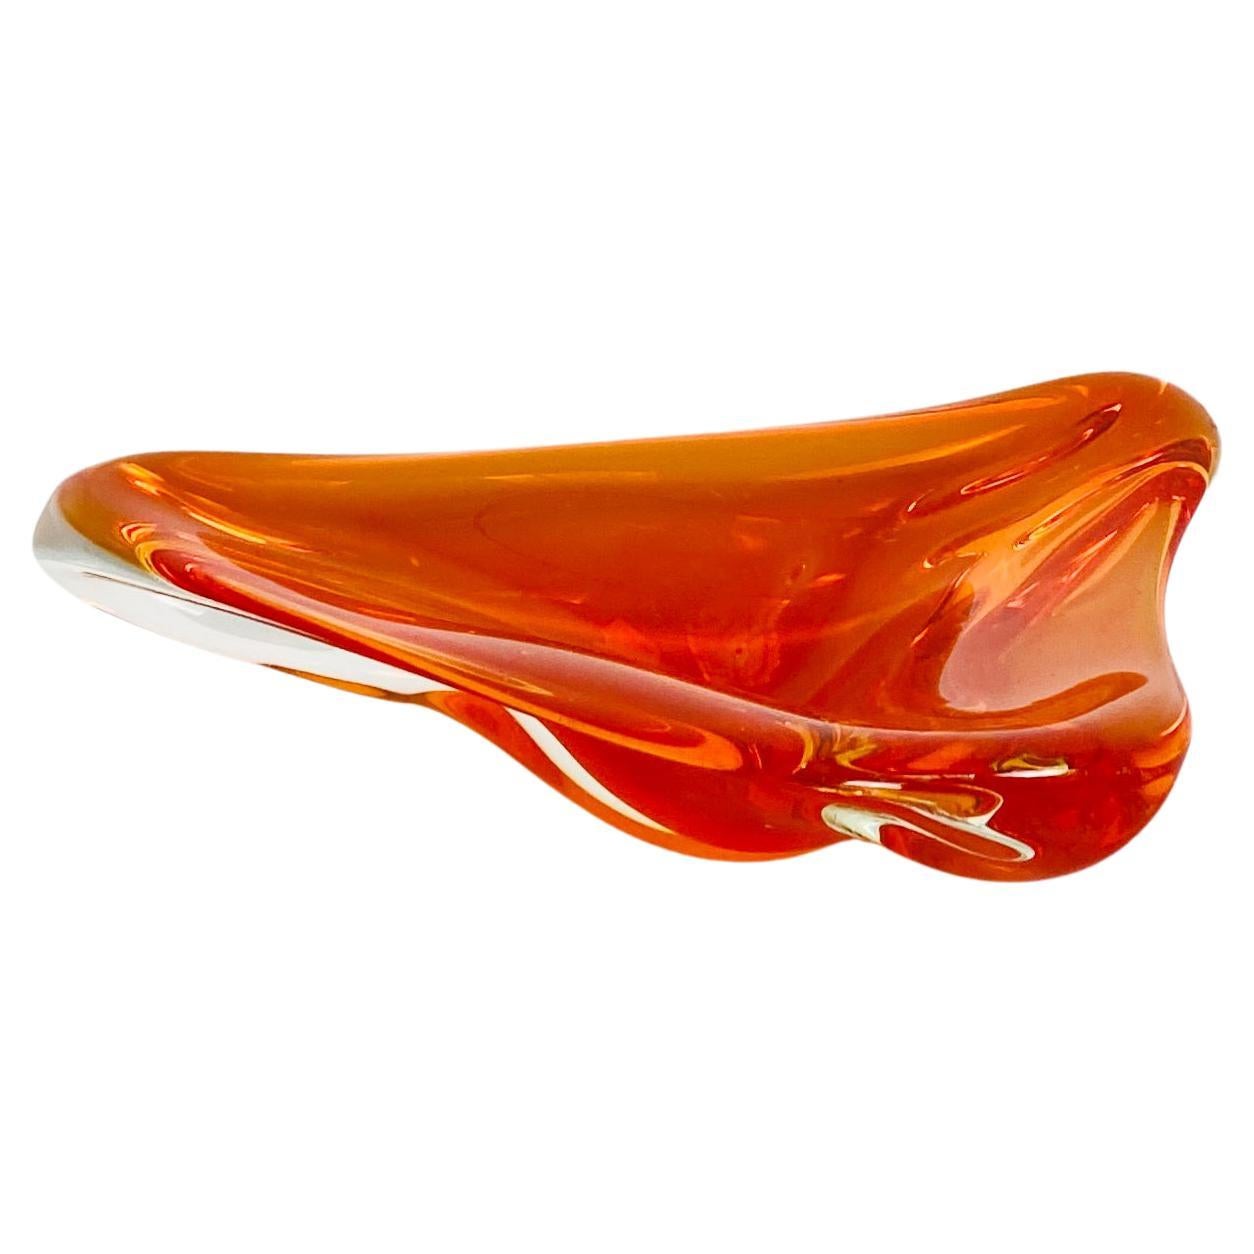 Space age Orange and trasparent Murano glass ashtray, form 1970 period. 
This ashtray have an irregular shaped and the orange color is obtained with the same technique of the 